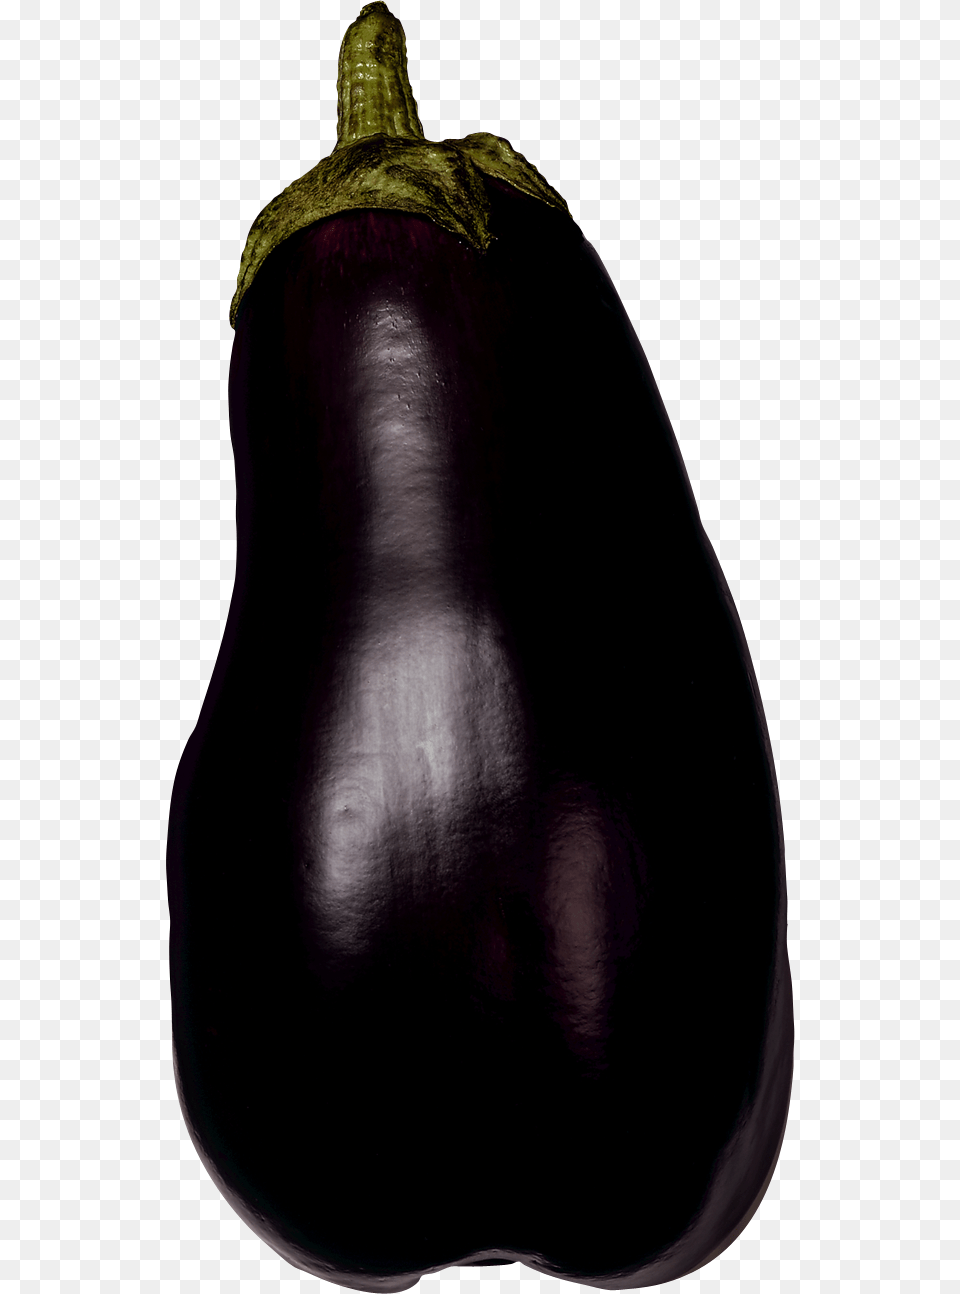 Hd Eggplant Free Download, Food, Produce, Plant, Vegetable Png Image